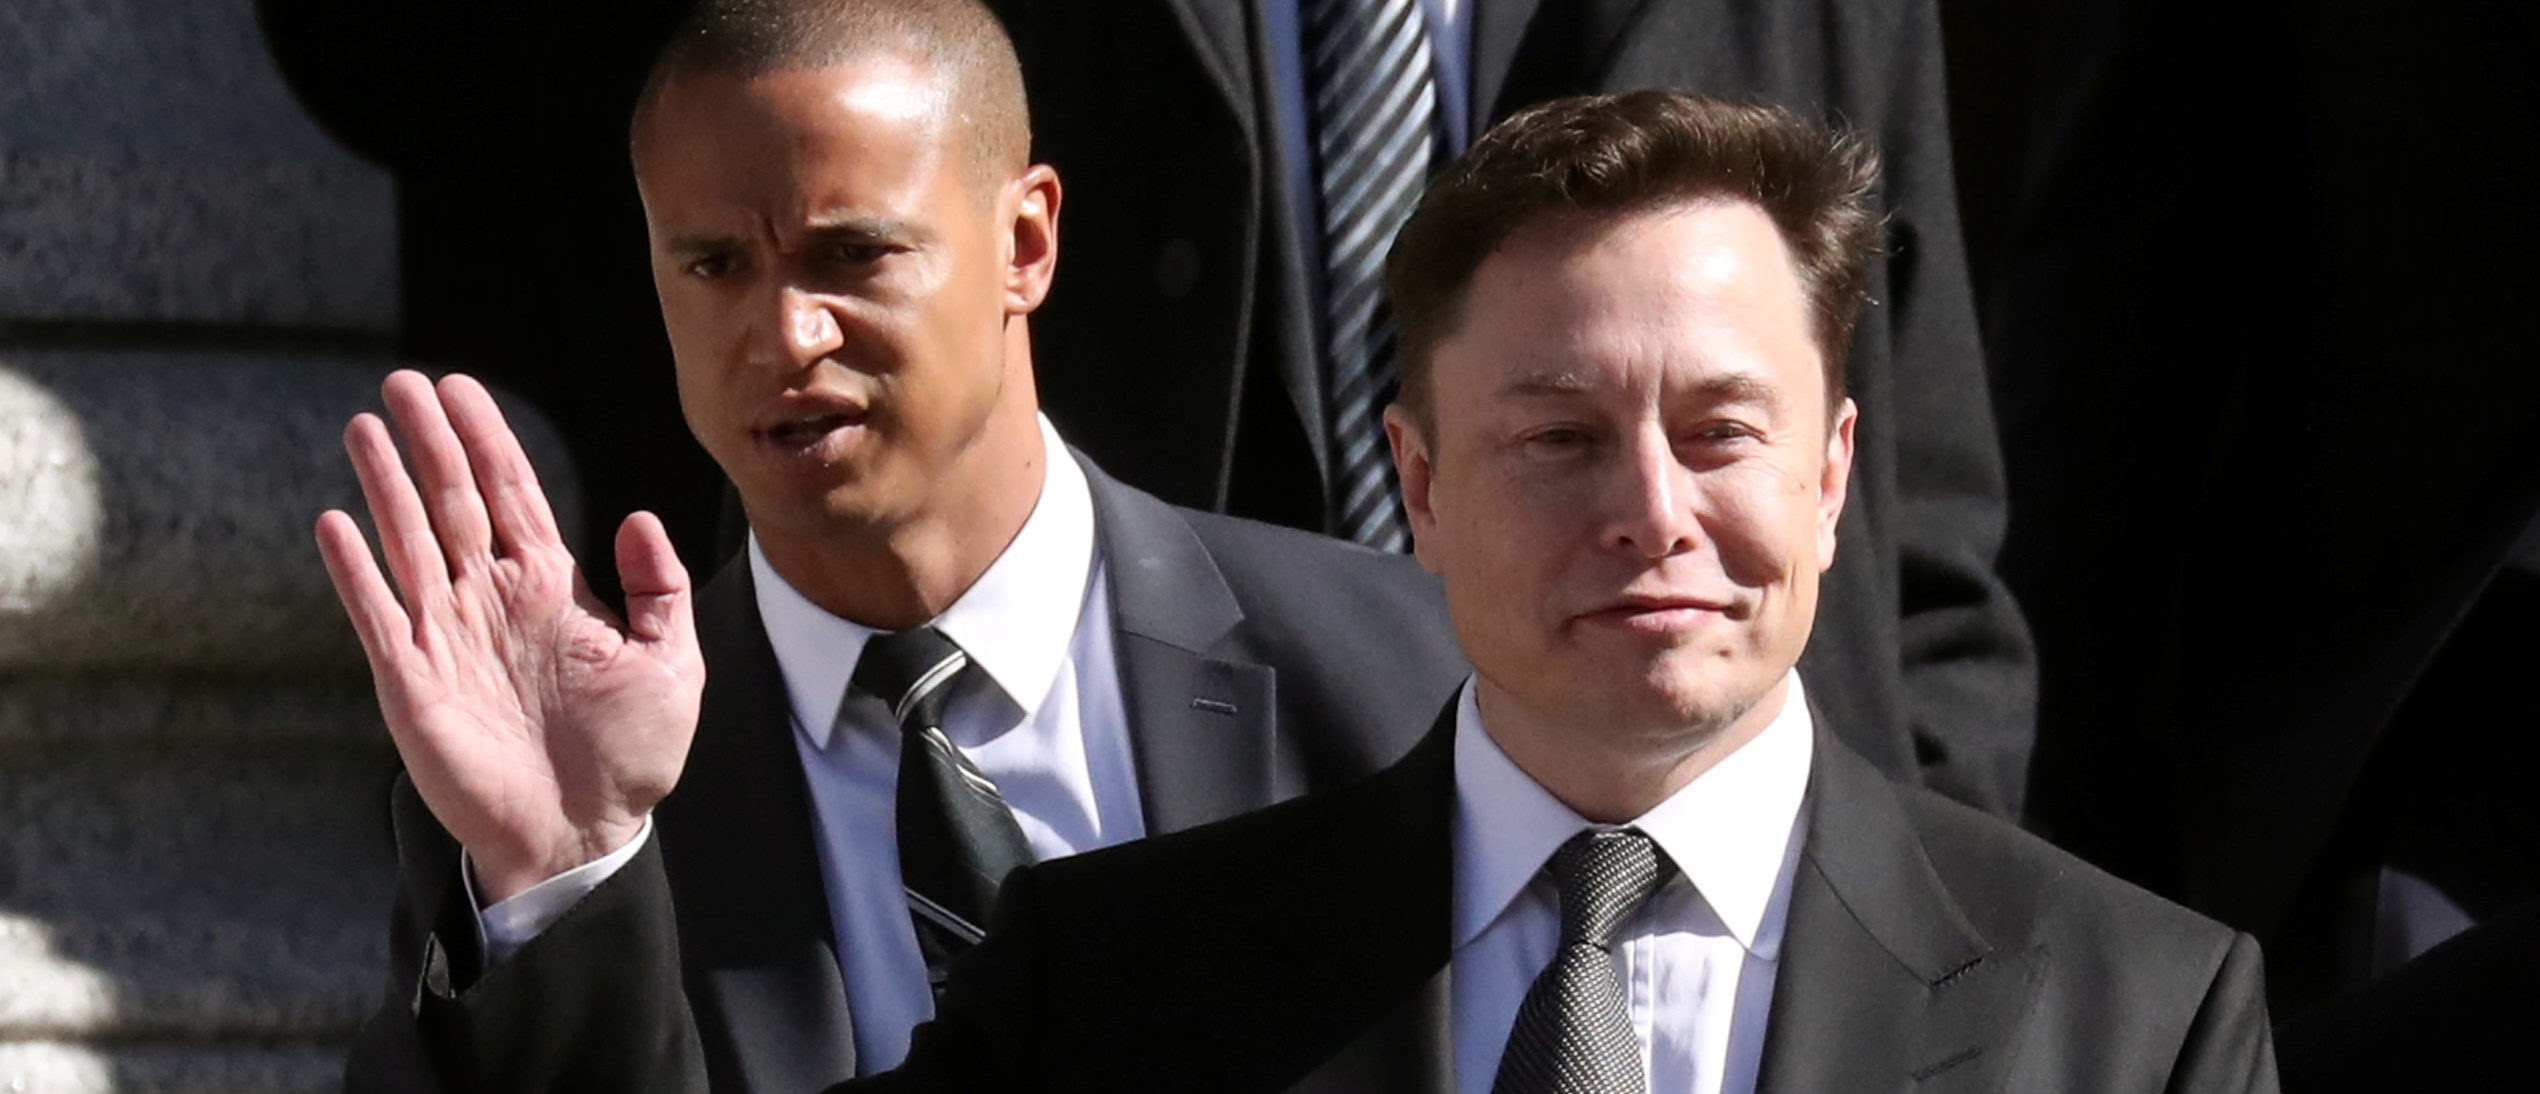 Elon Musk Sends Ominous Tweet About Dying ‘Under Mysterious Circumstances’